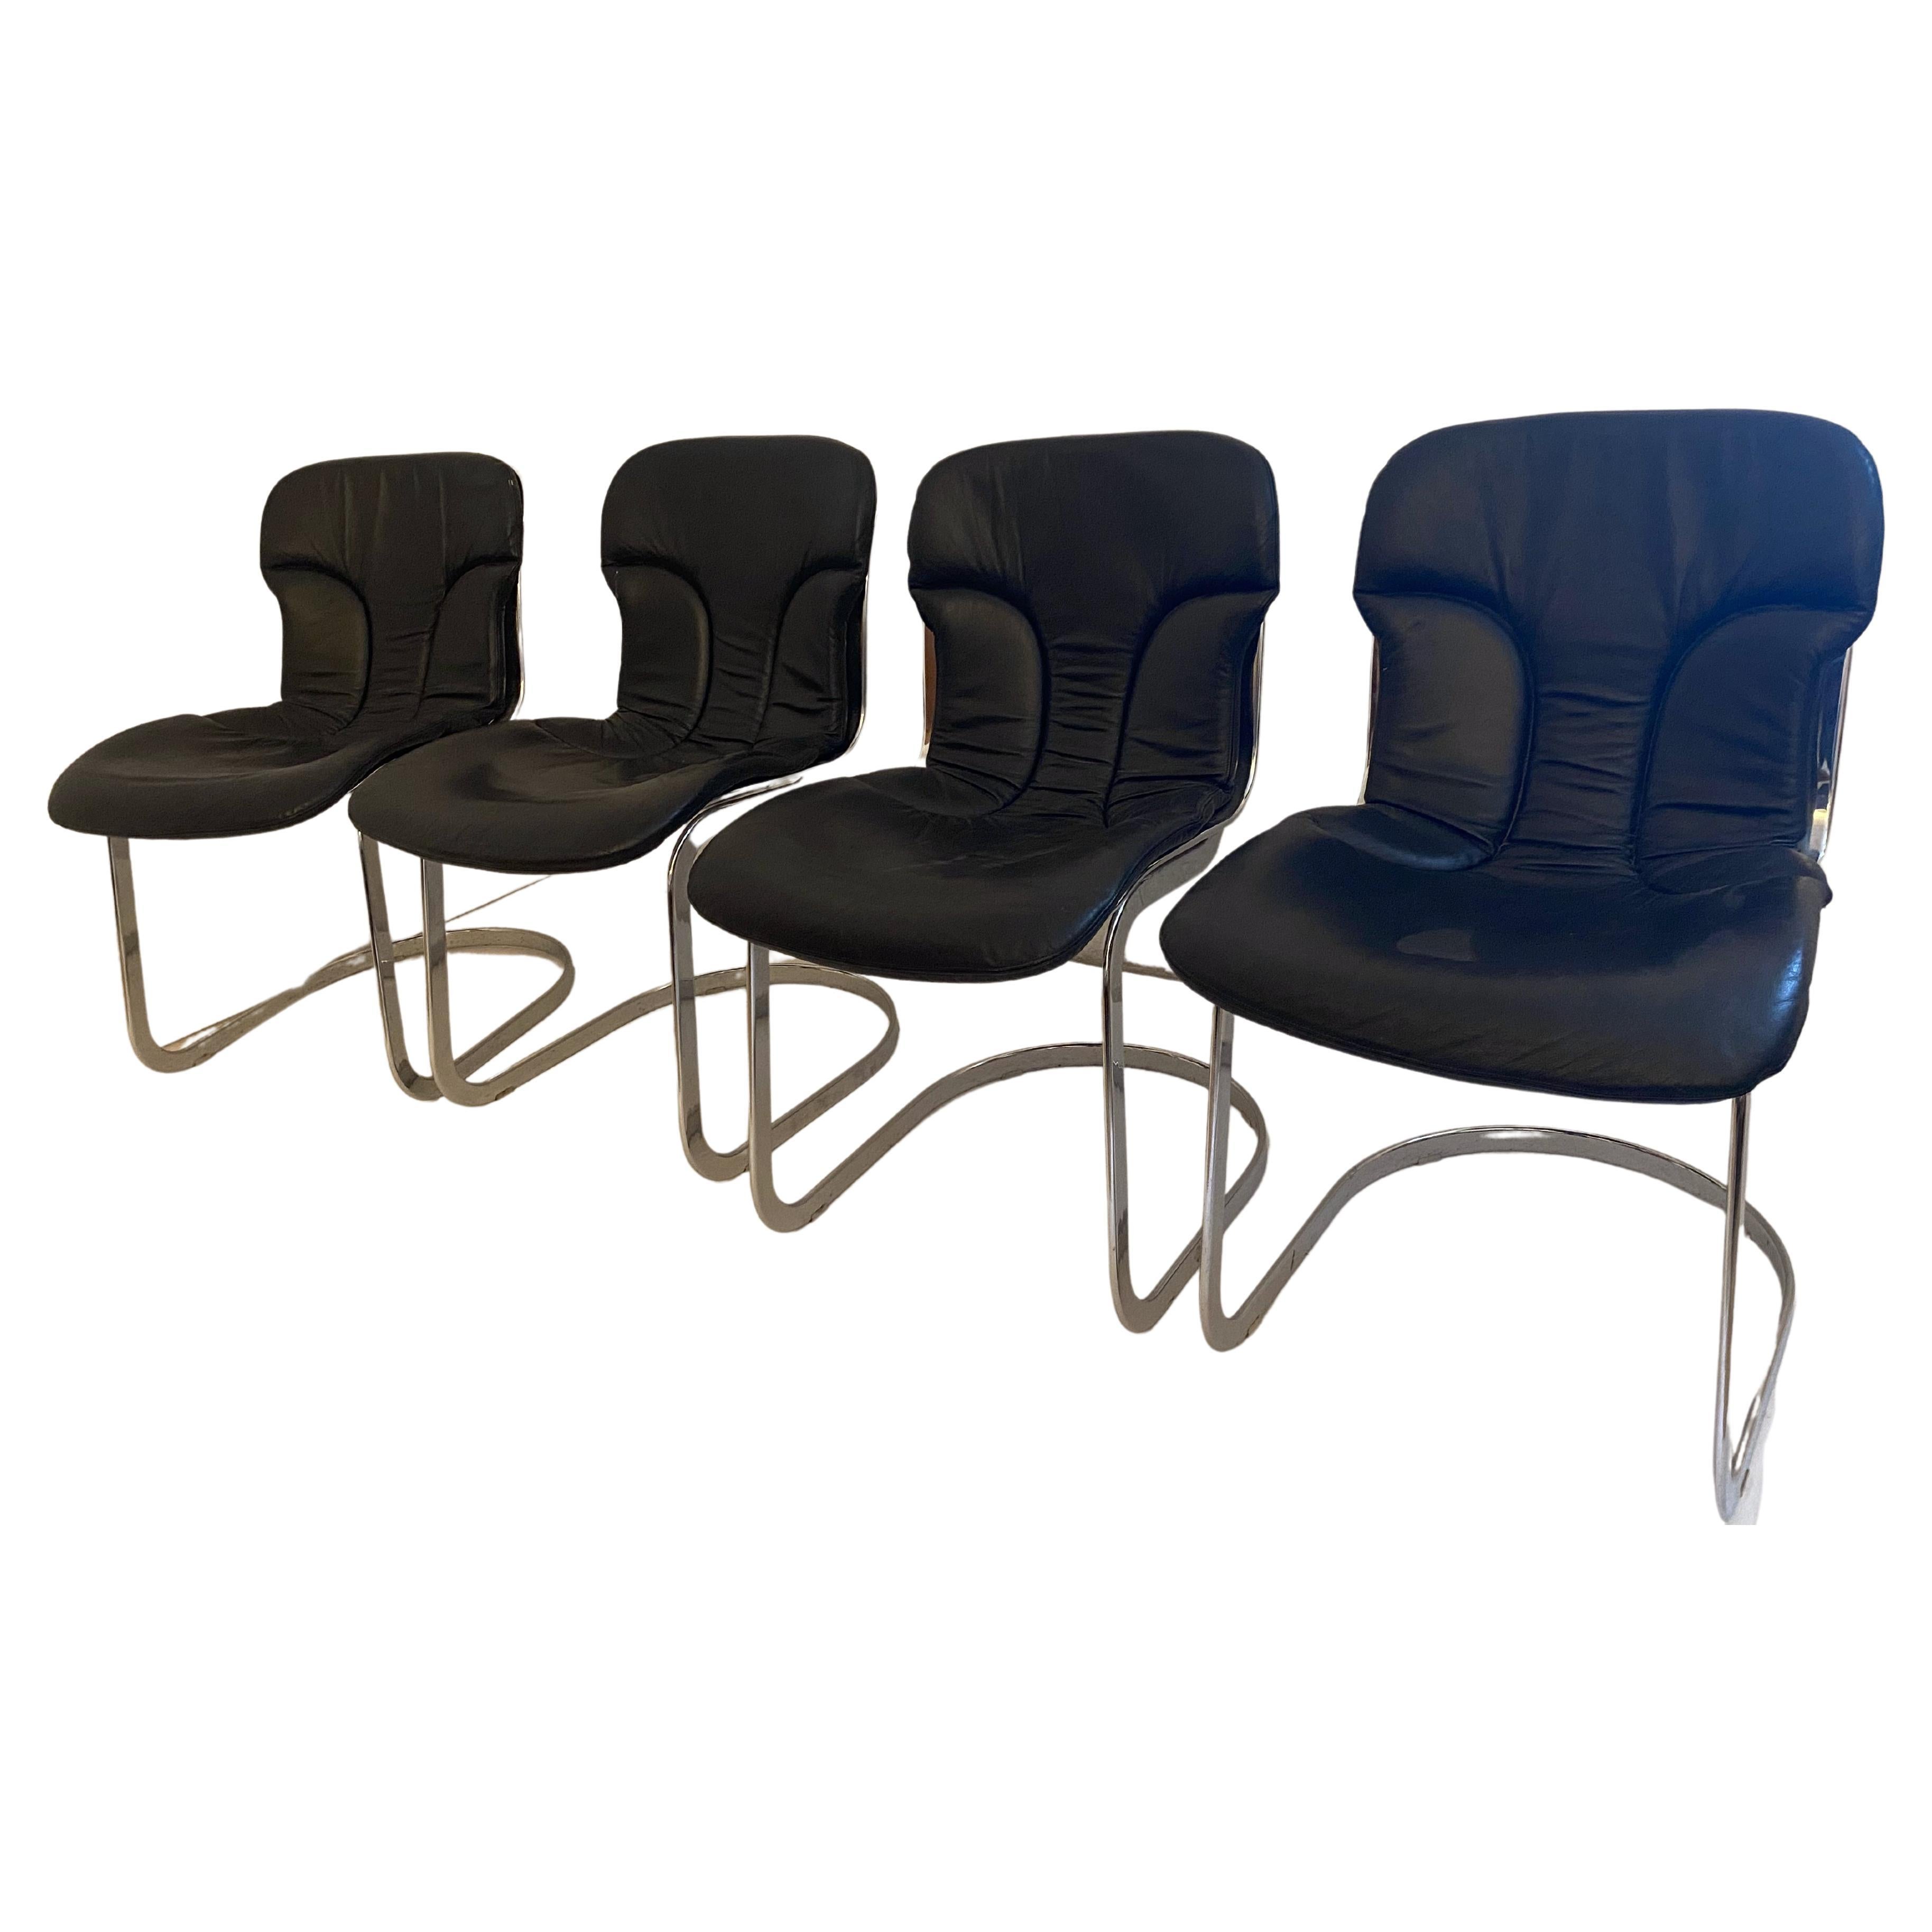 Cidue Dining Chairs Designed by Willy Rizzo Set of 4 Chrome and Black Leather